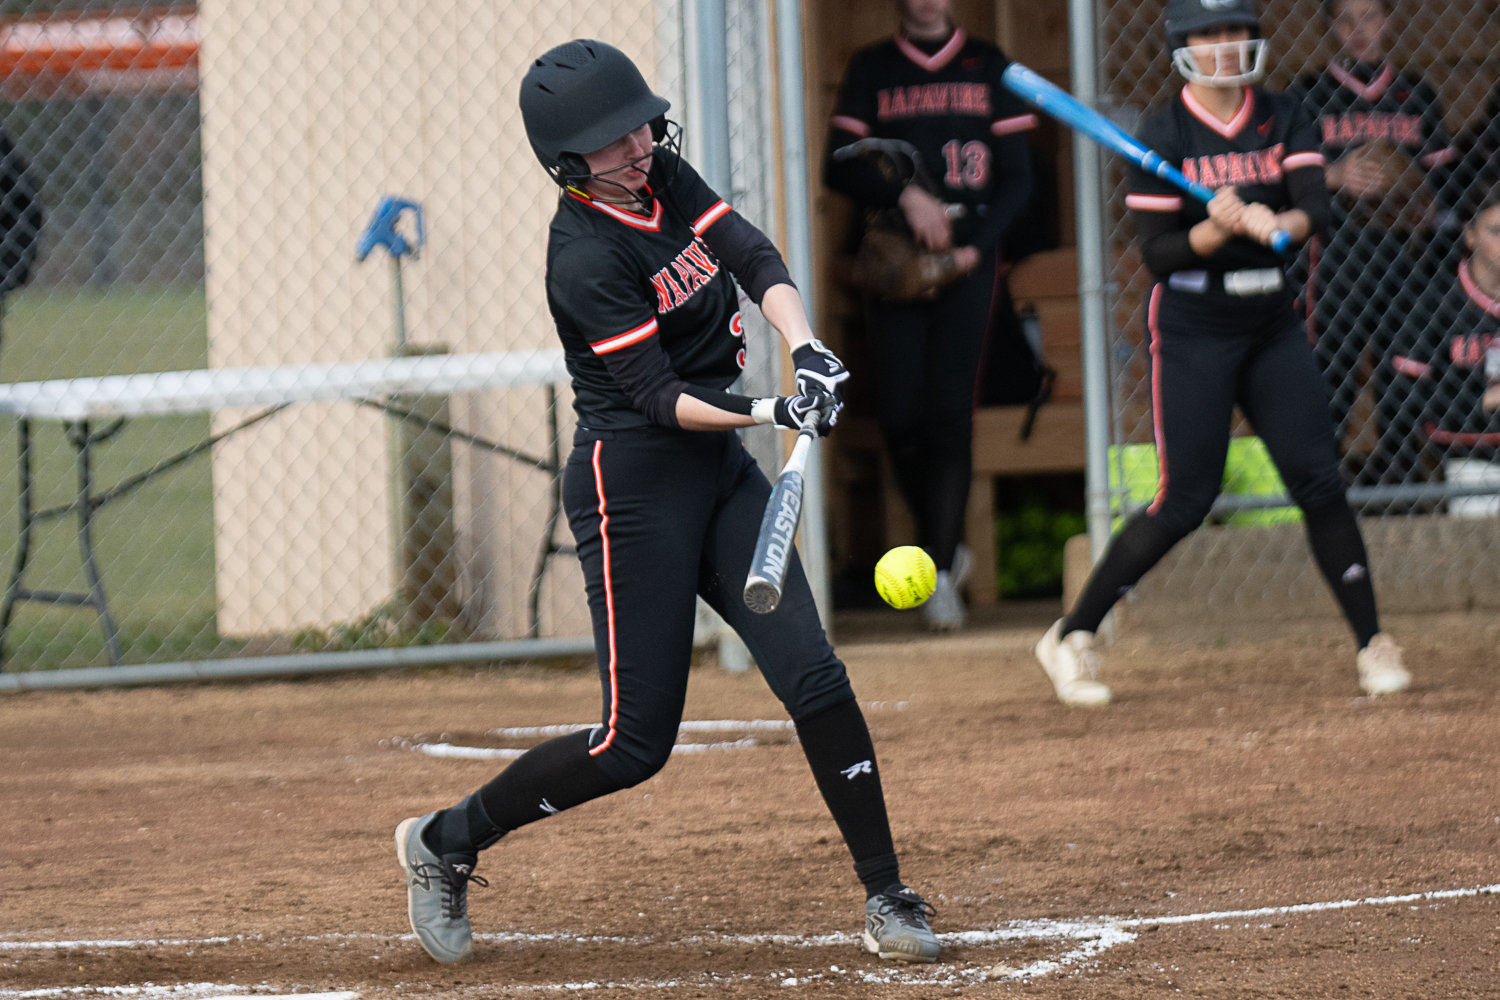 Cailyn Milton gets to contact on a swing during Napavine's game against Elma on March 20.